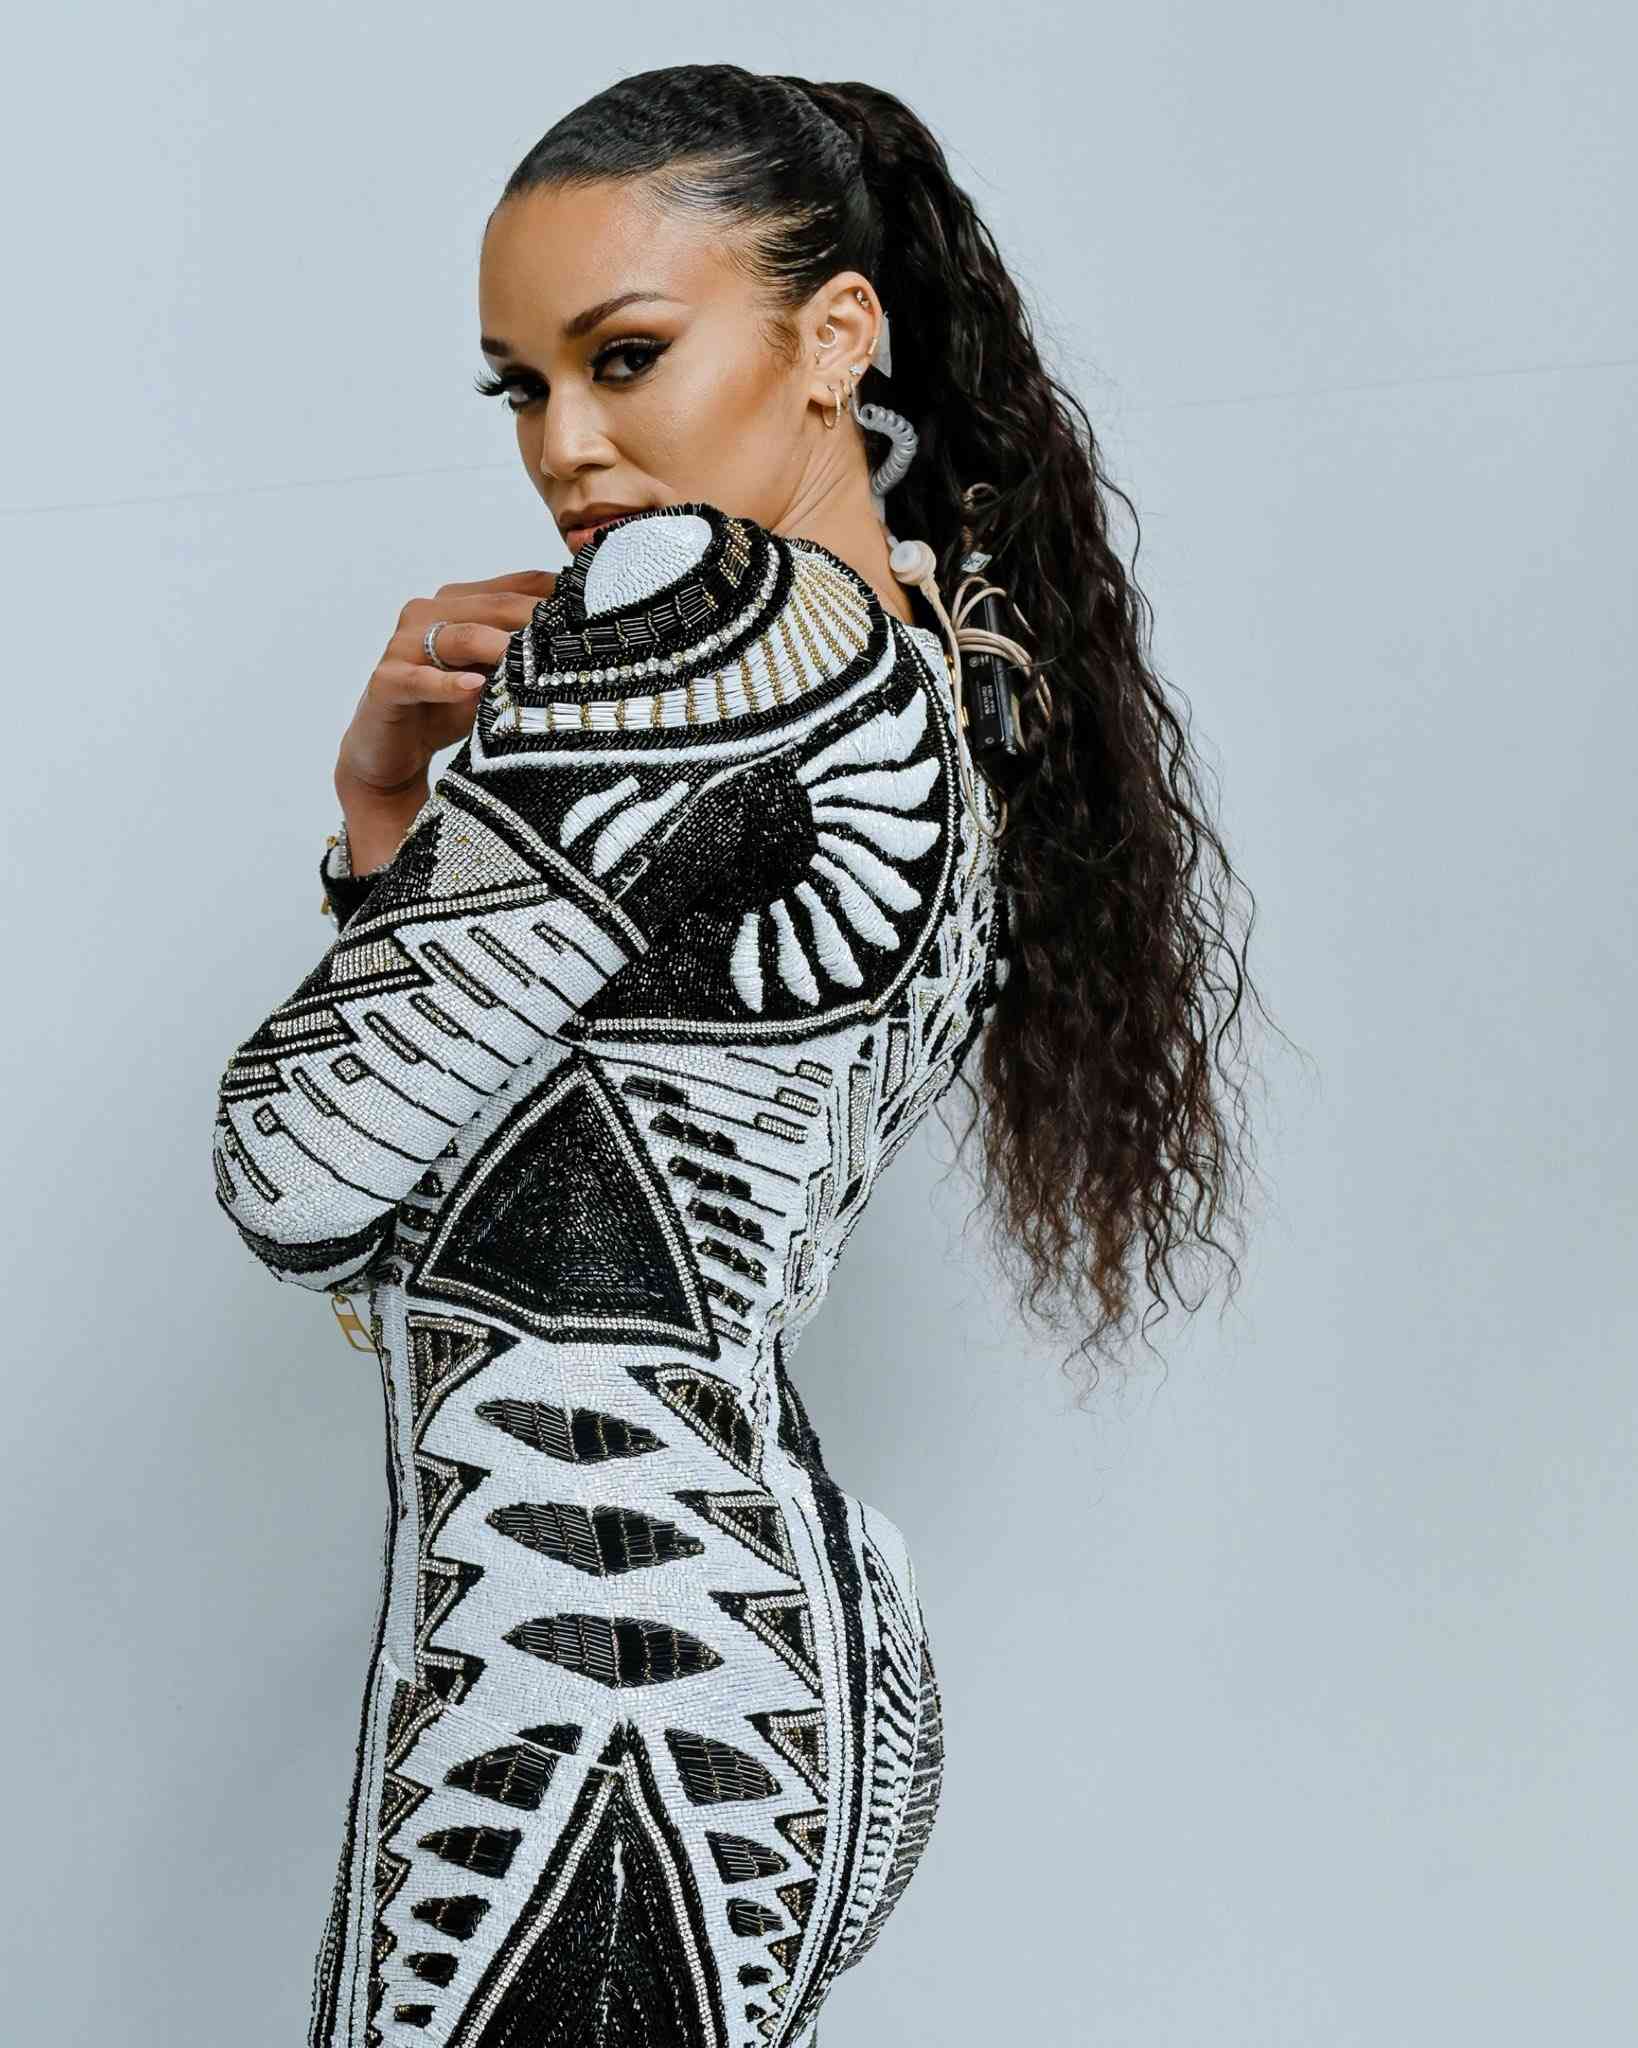 Pearl Thusi Gets First international Gig As A Deejay